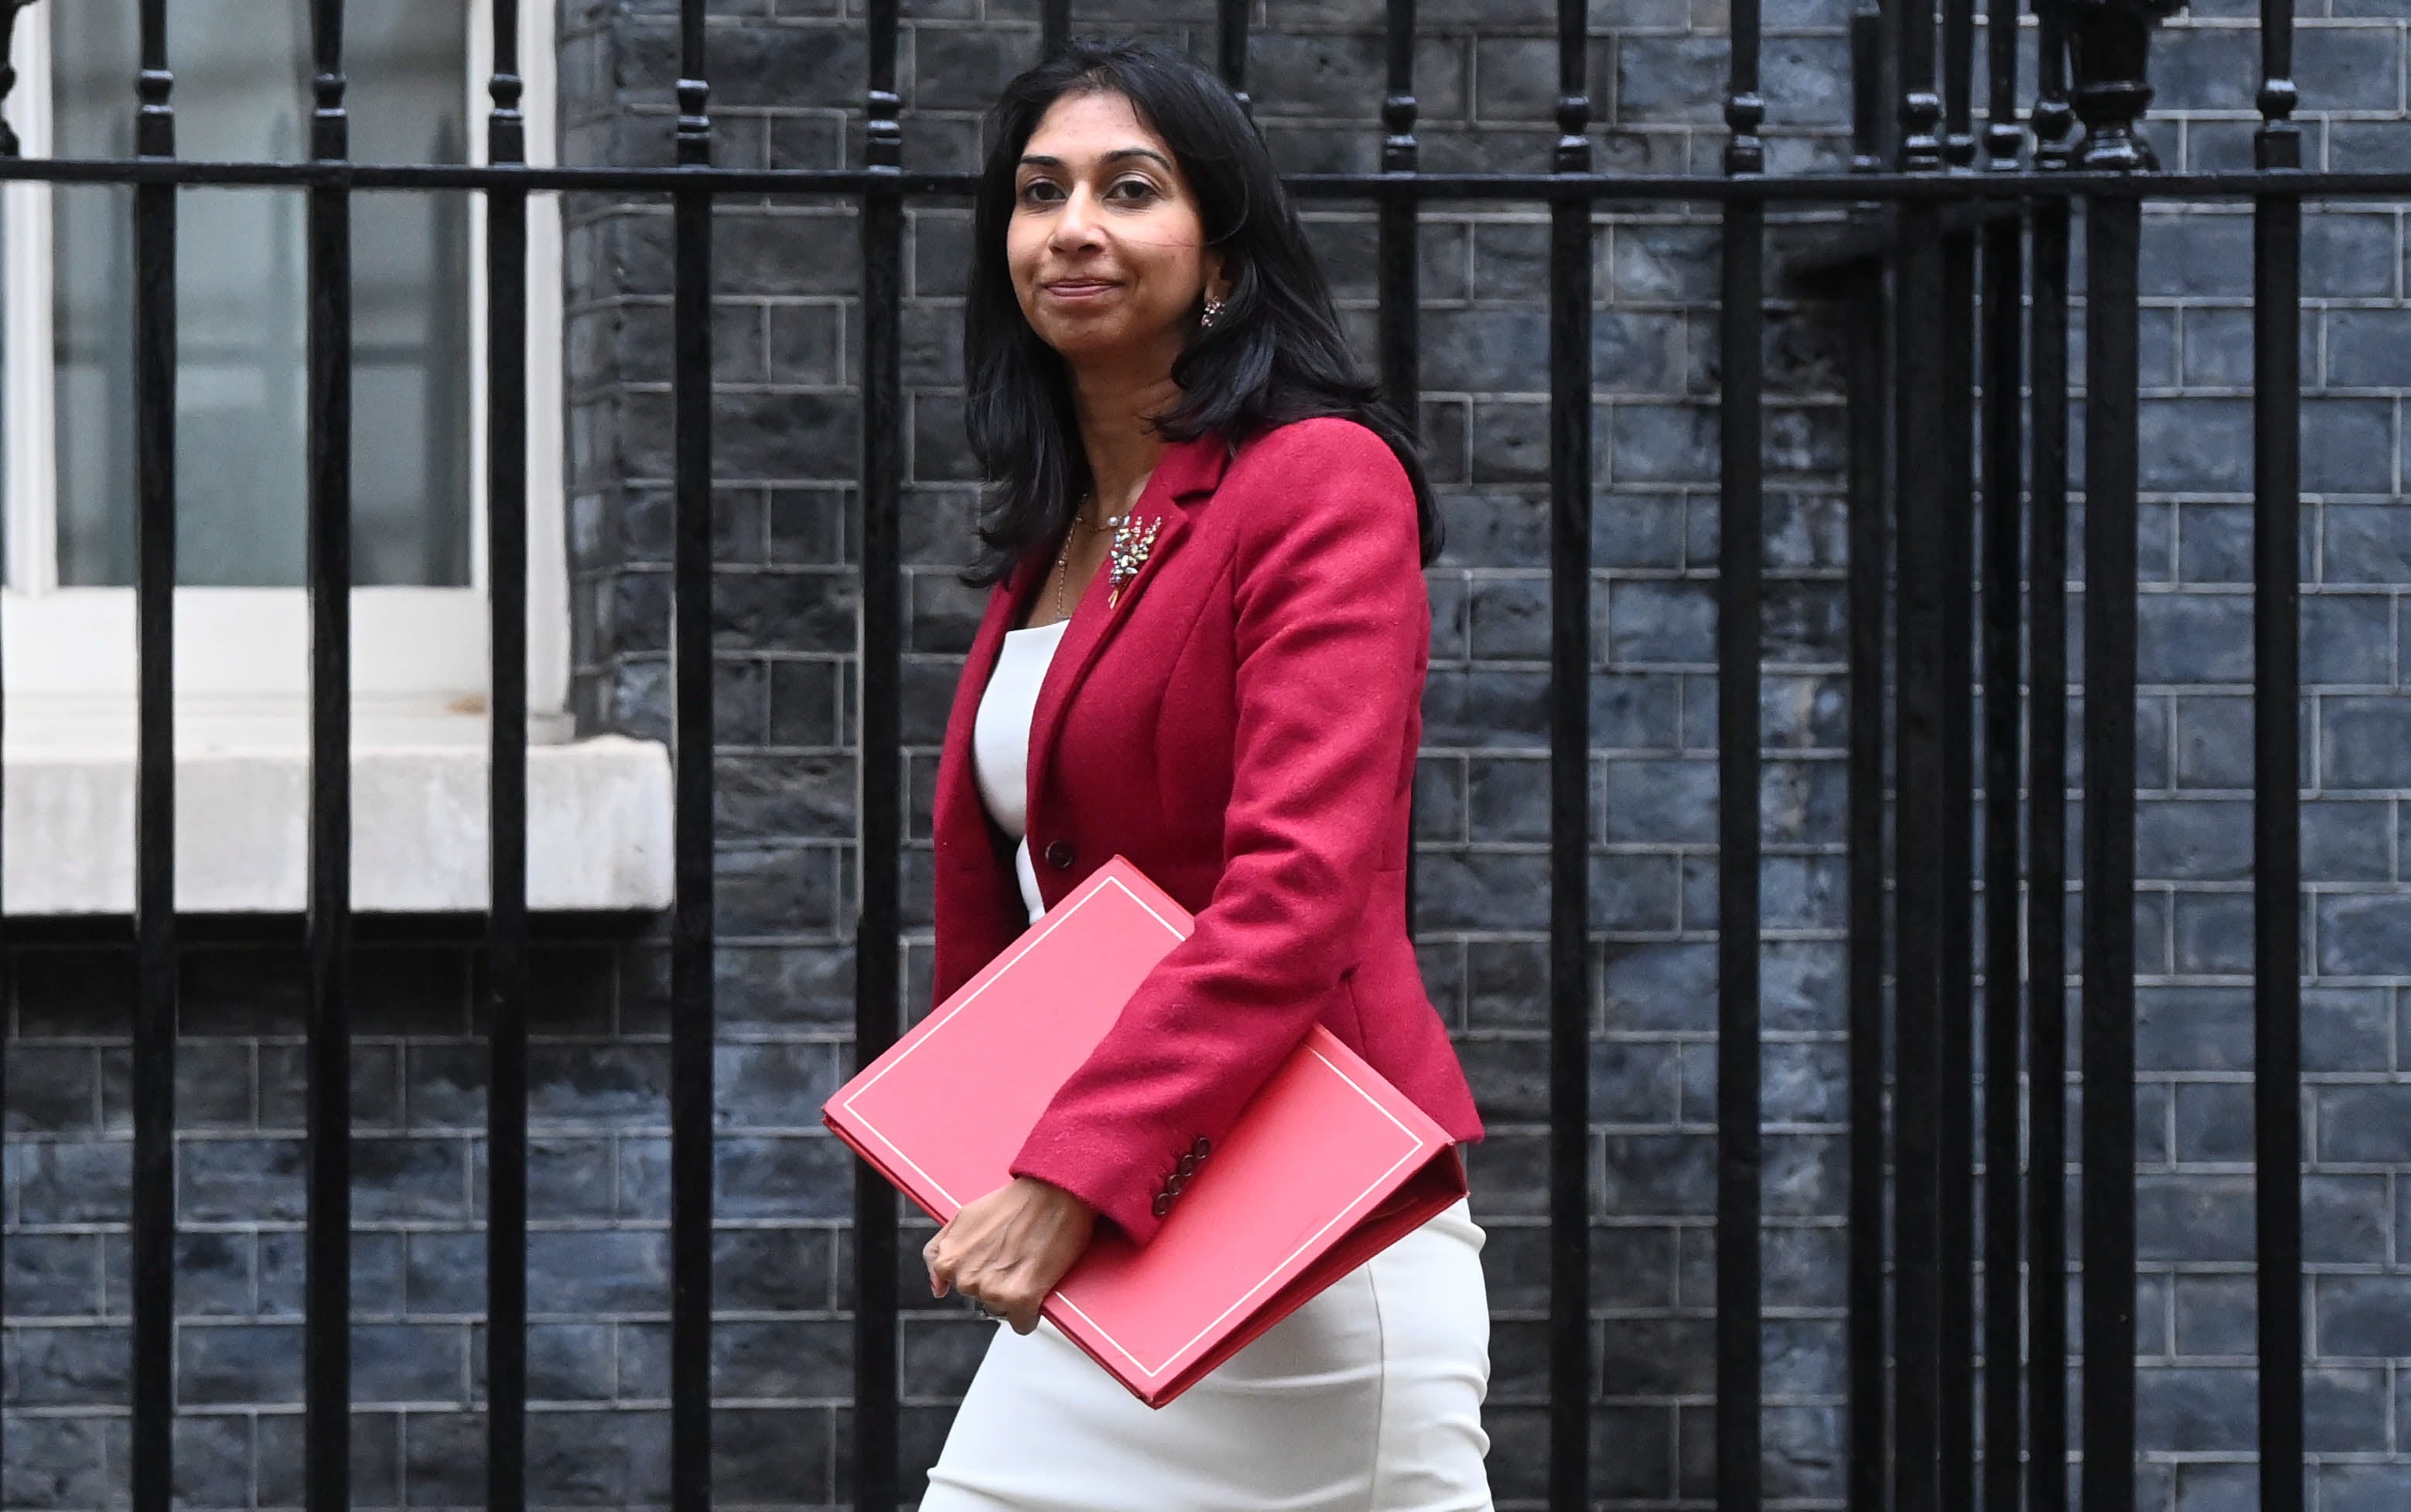 Suella Braverman has been criticised for using ‘inflammatory language’ about the migrant crisis